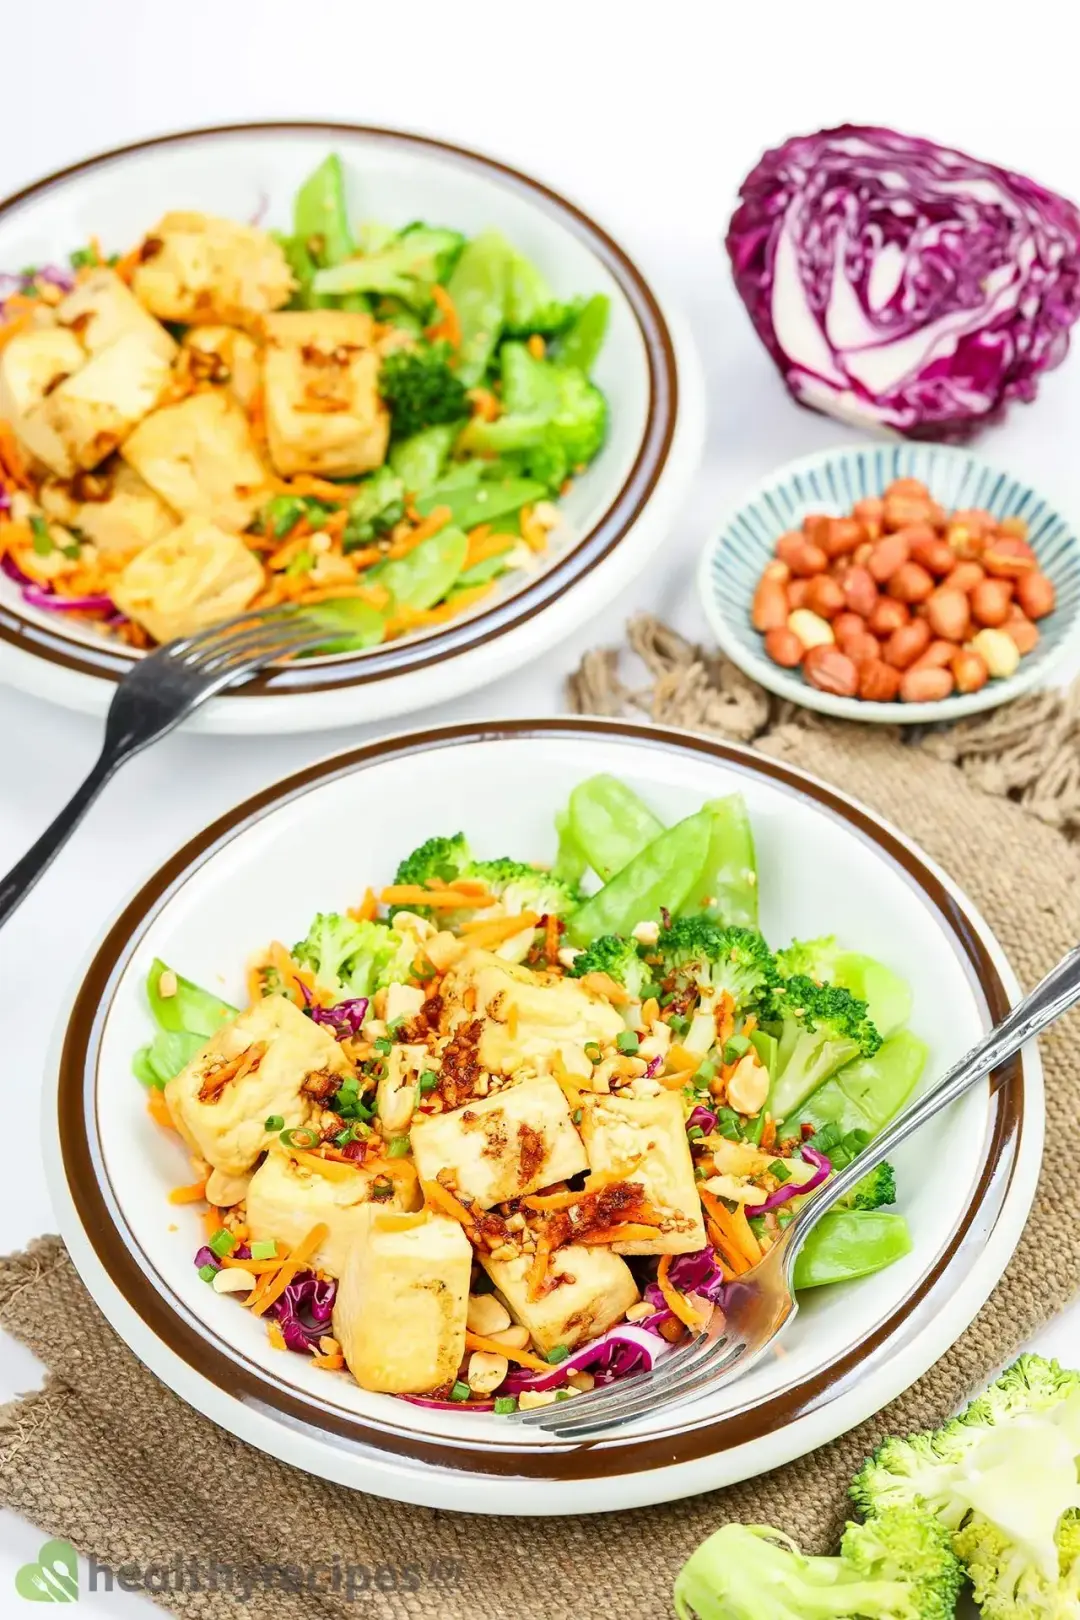 How to Make Ahead and Store the Leftovers Tofu Salad